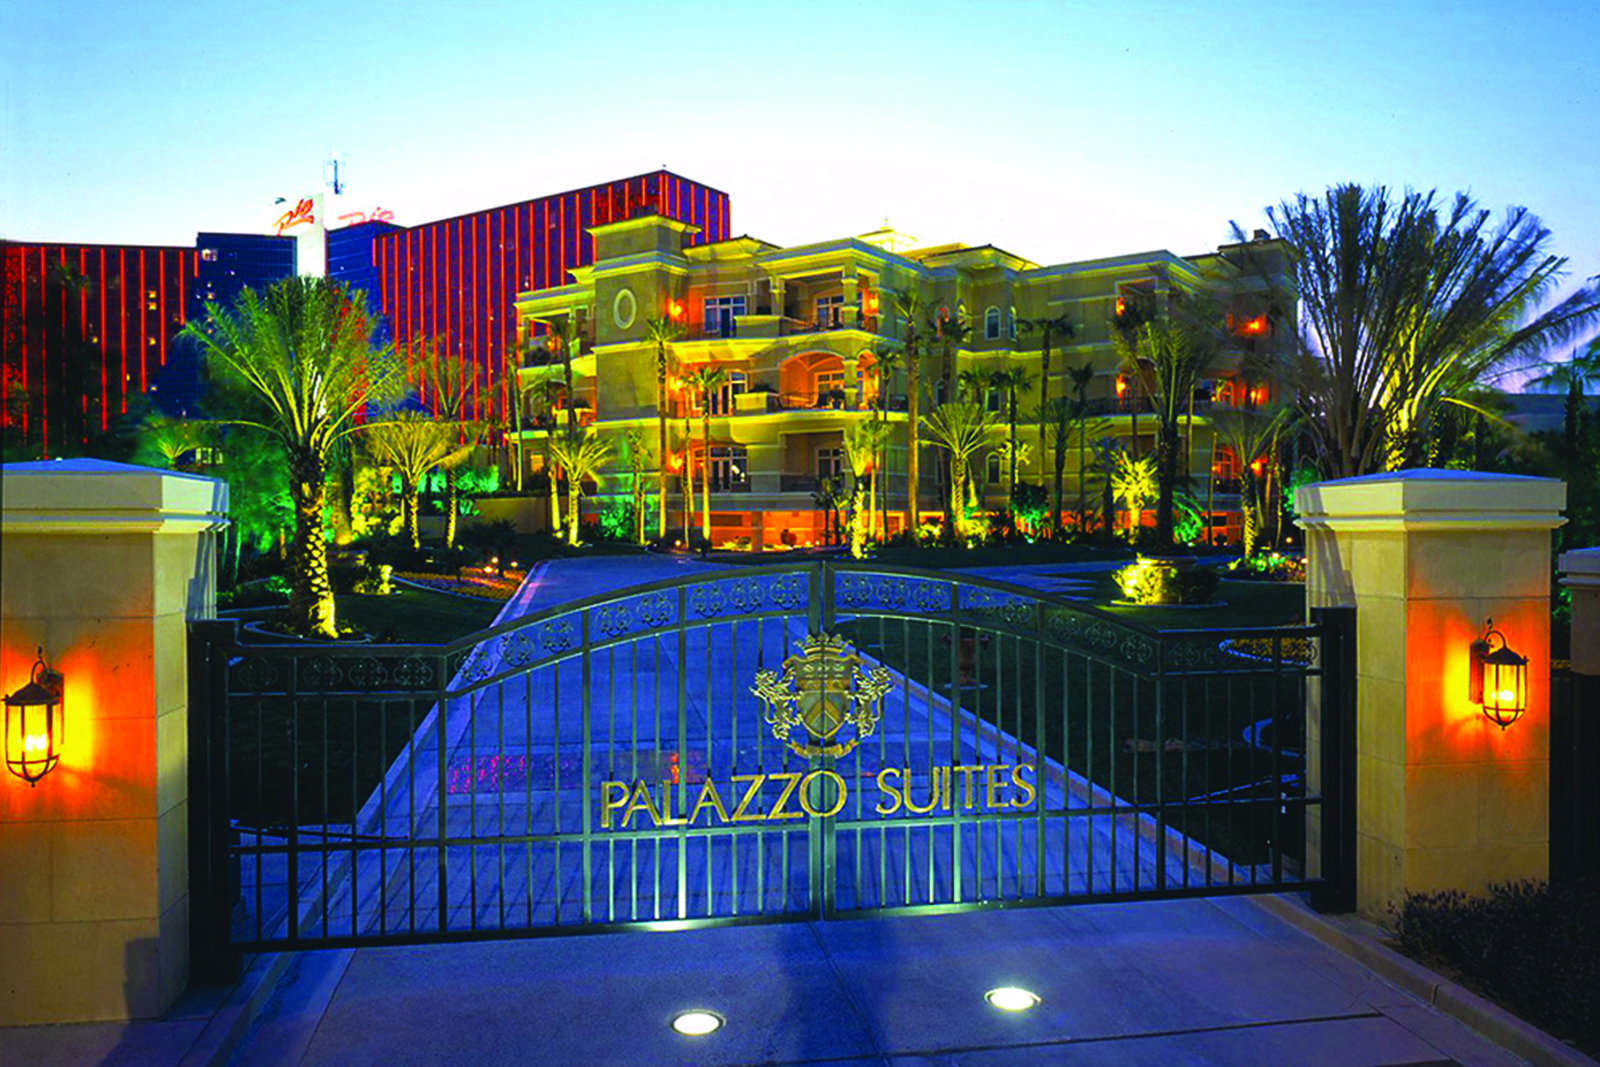 Palazzo Suites  prices and rooms.  Located at the Rio All-Suites in Las Vegas, NV.